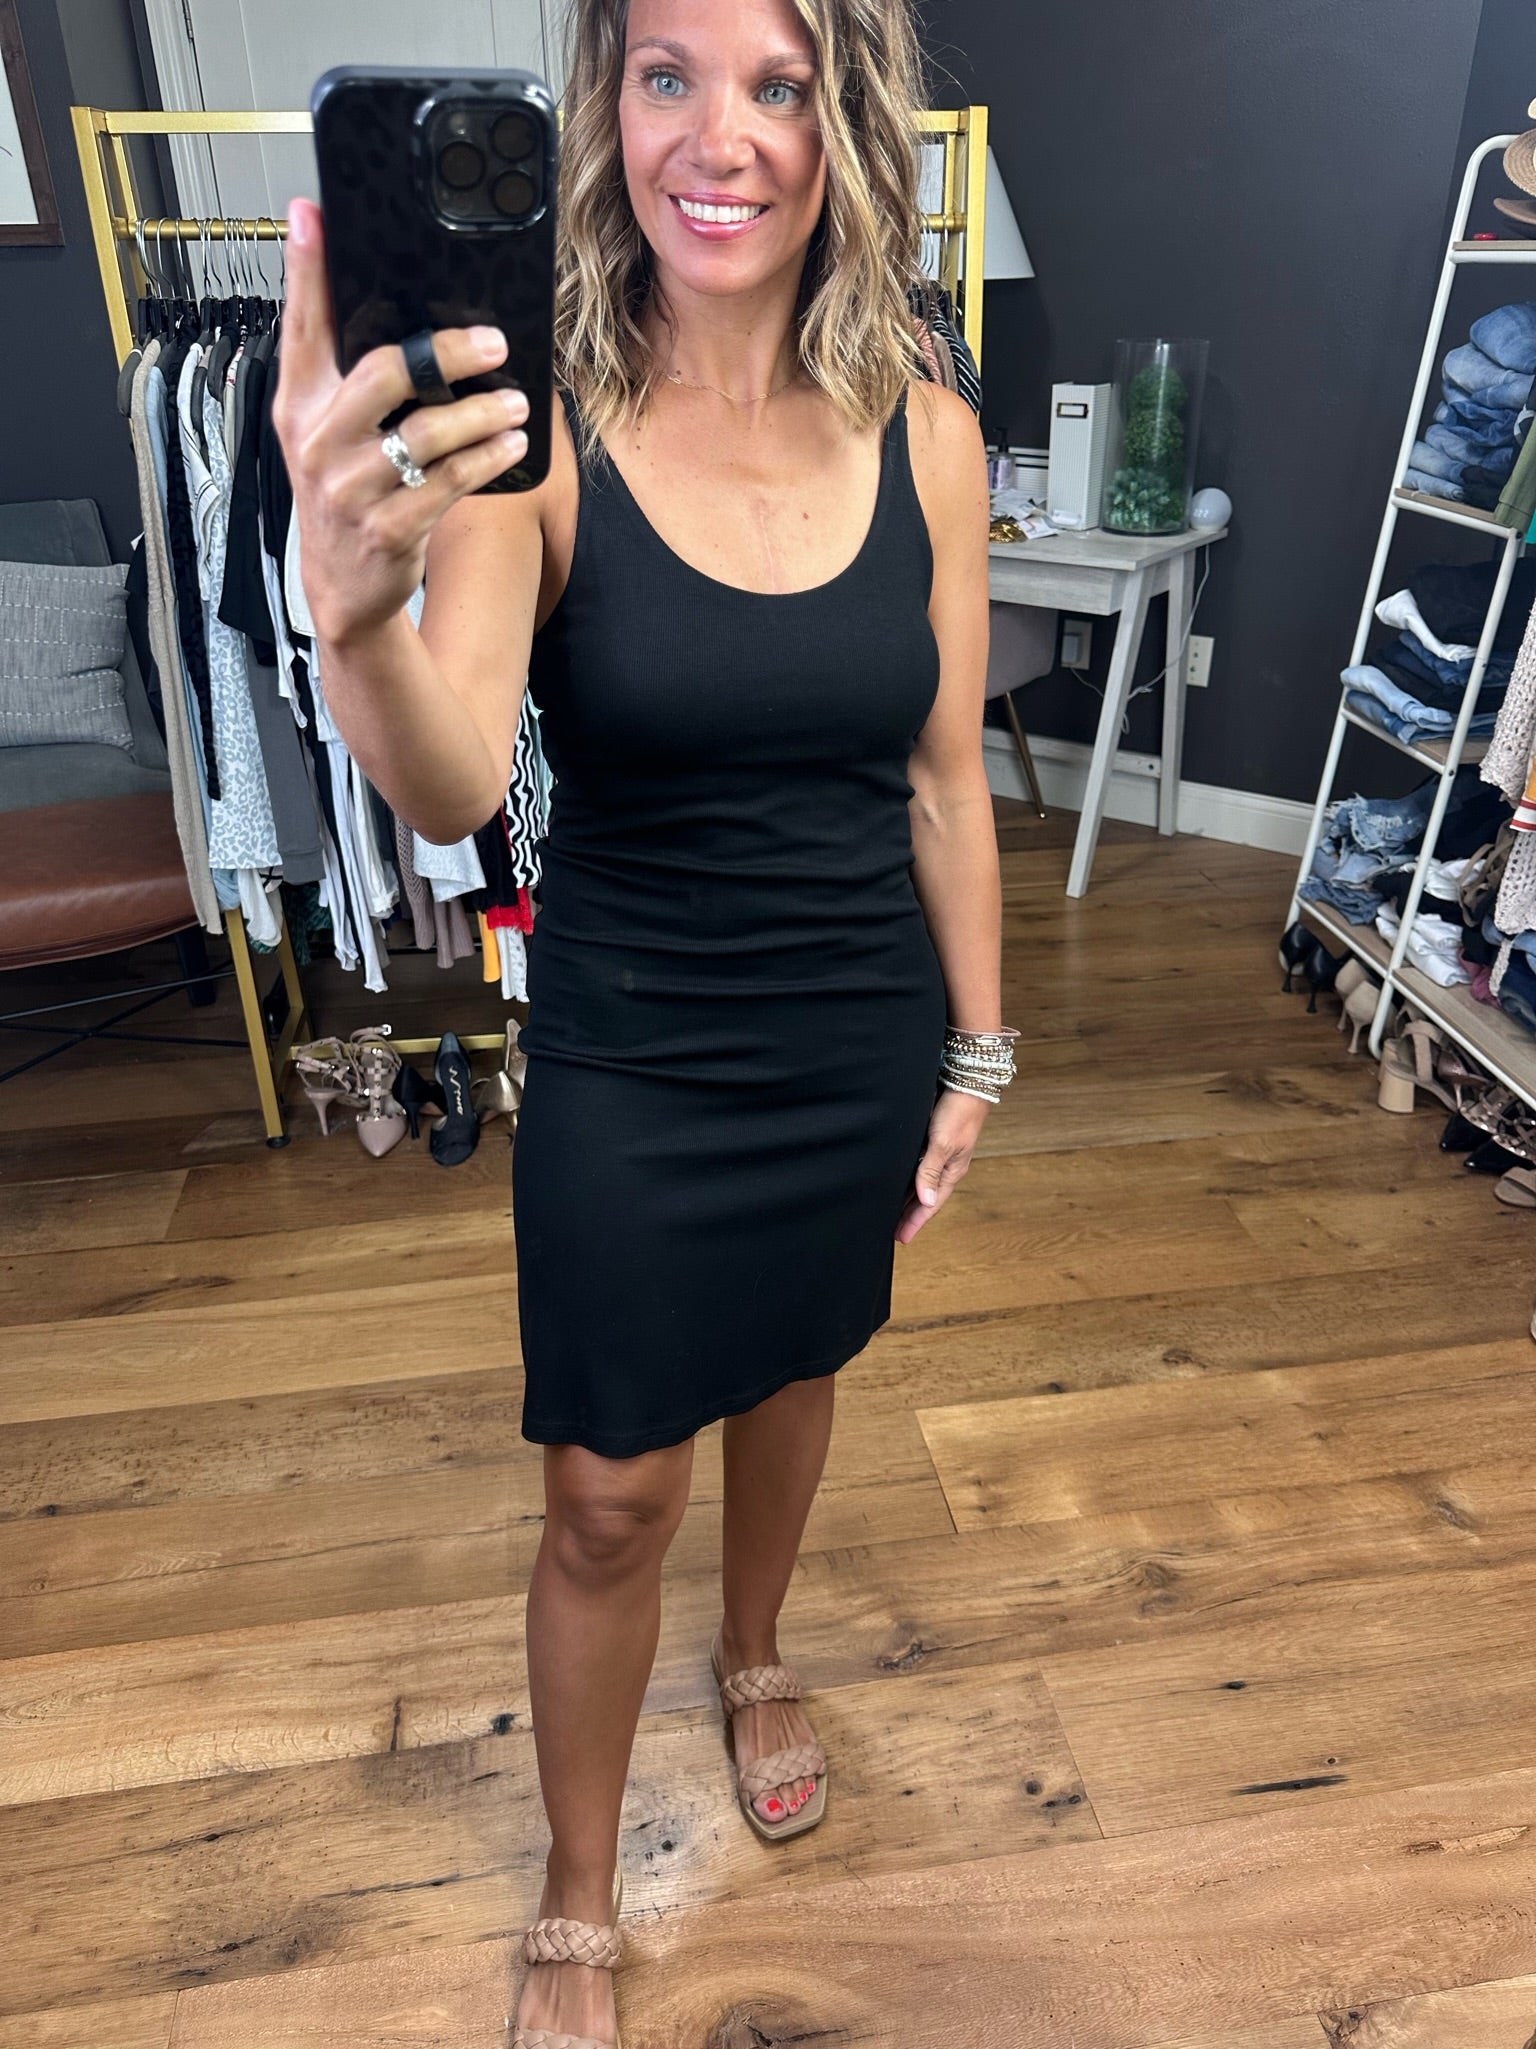 My Way Of Telling You Fitted Scoop Neck Dress - Multiple Options